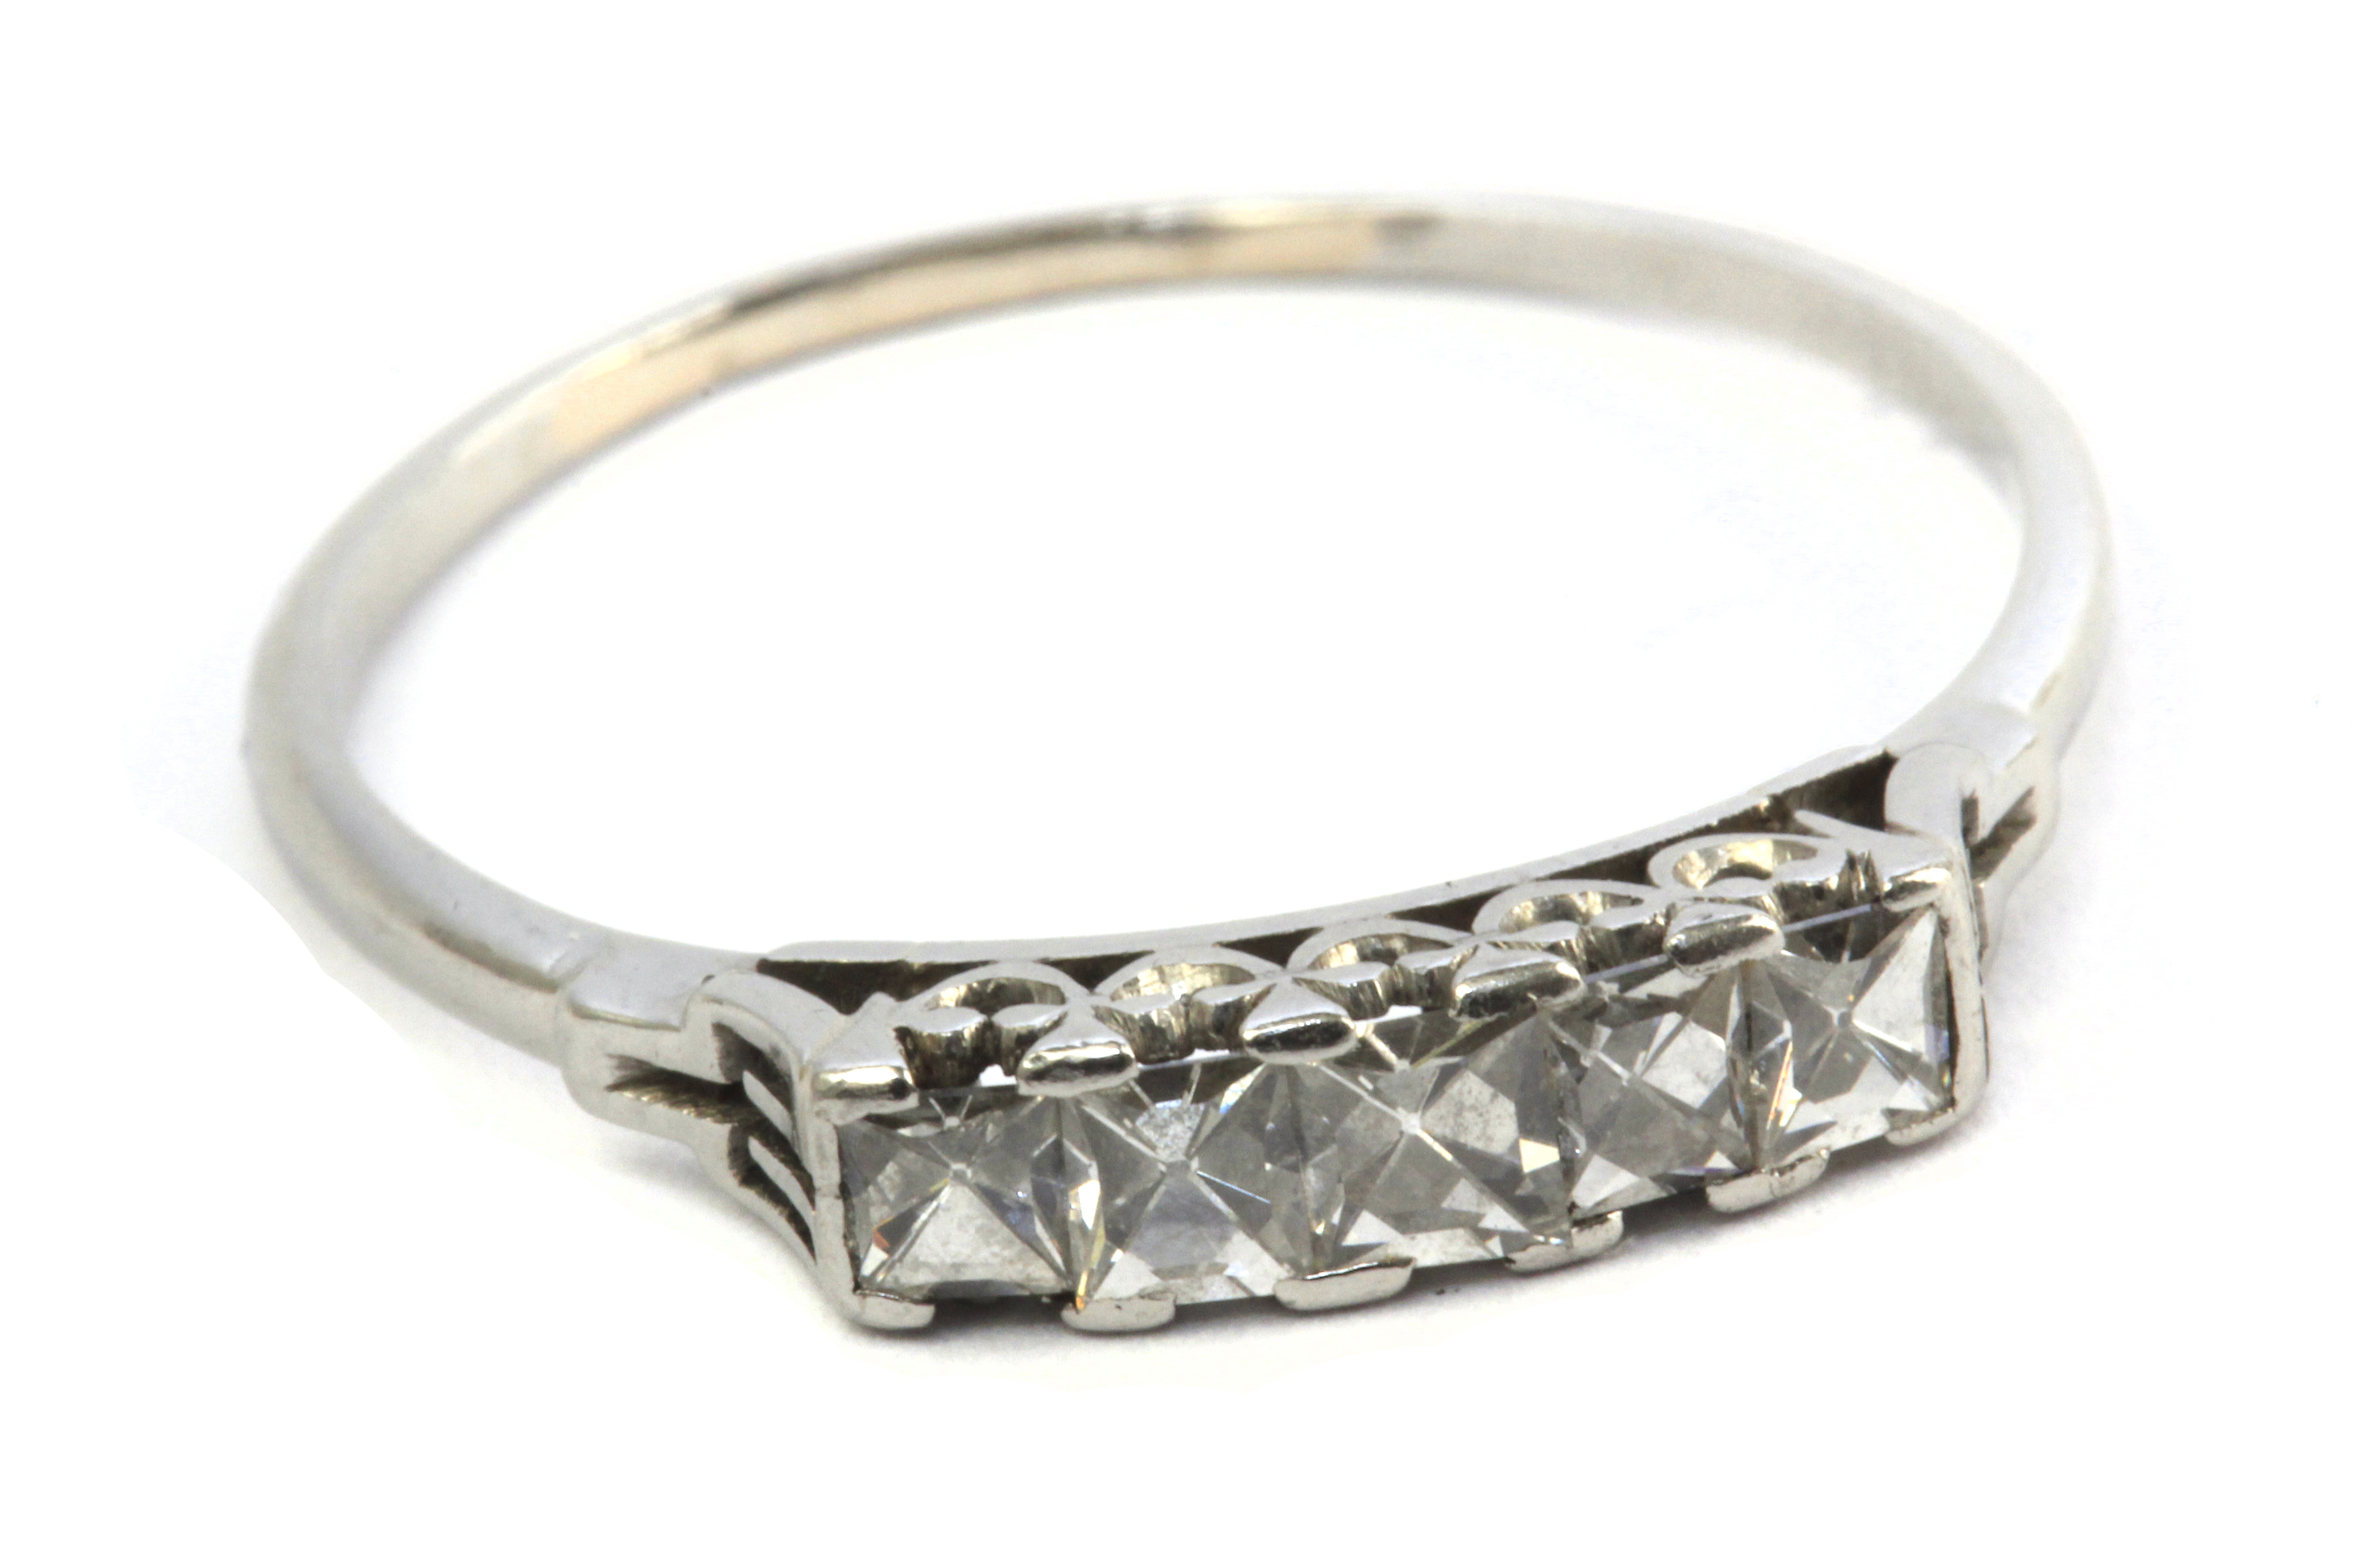 An early 20th century five stone diamond ring